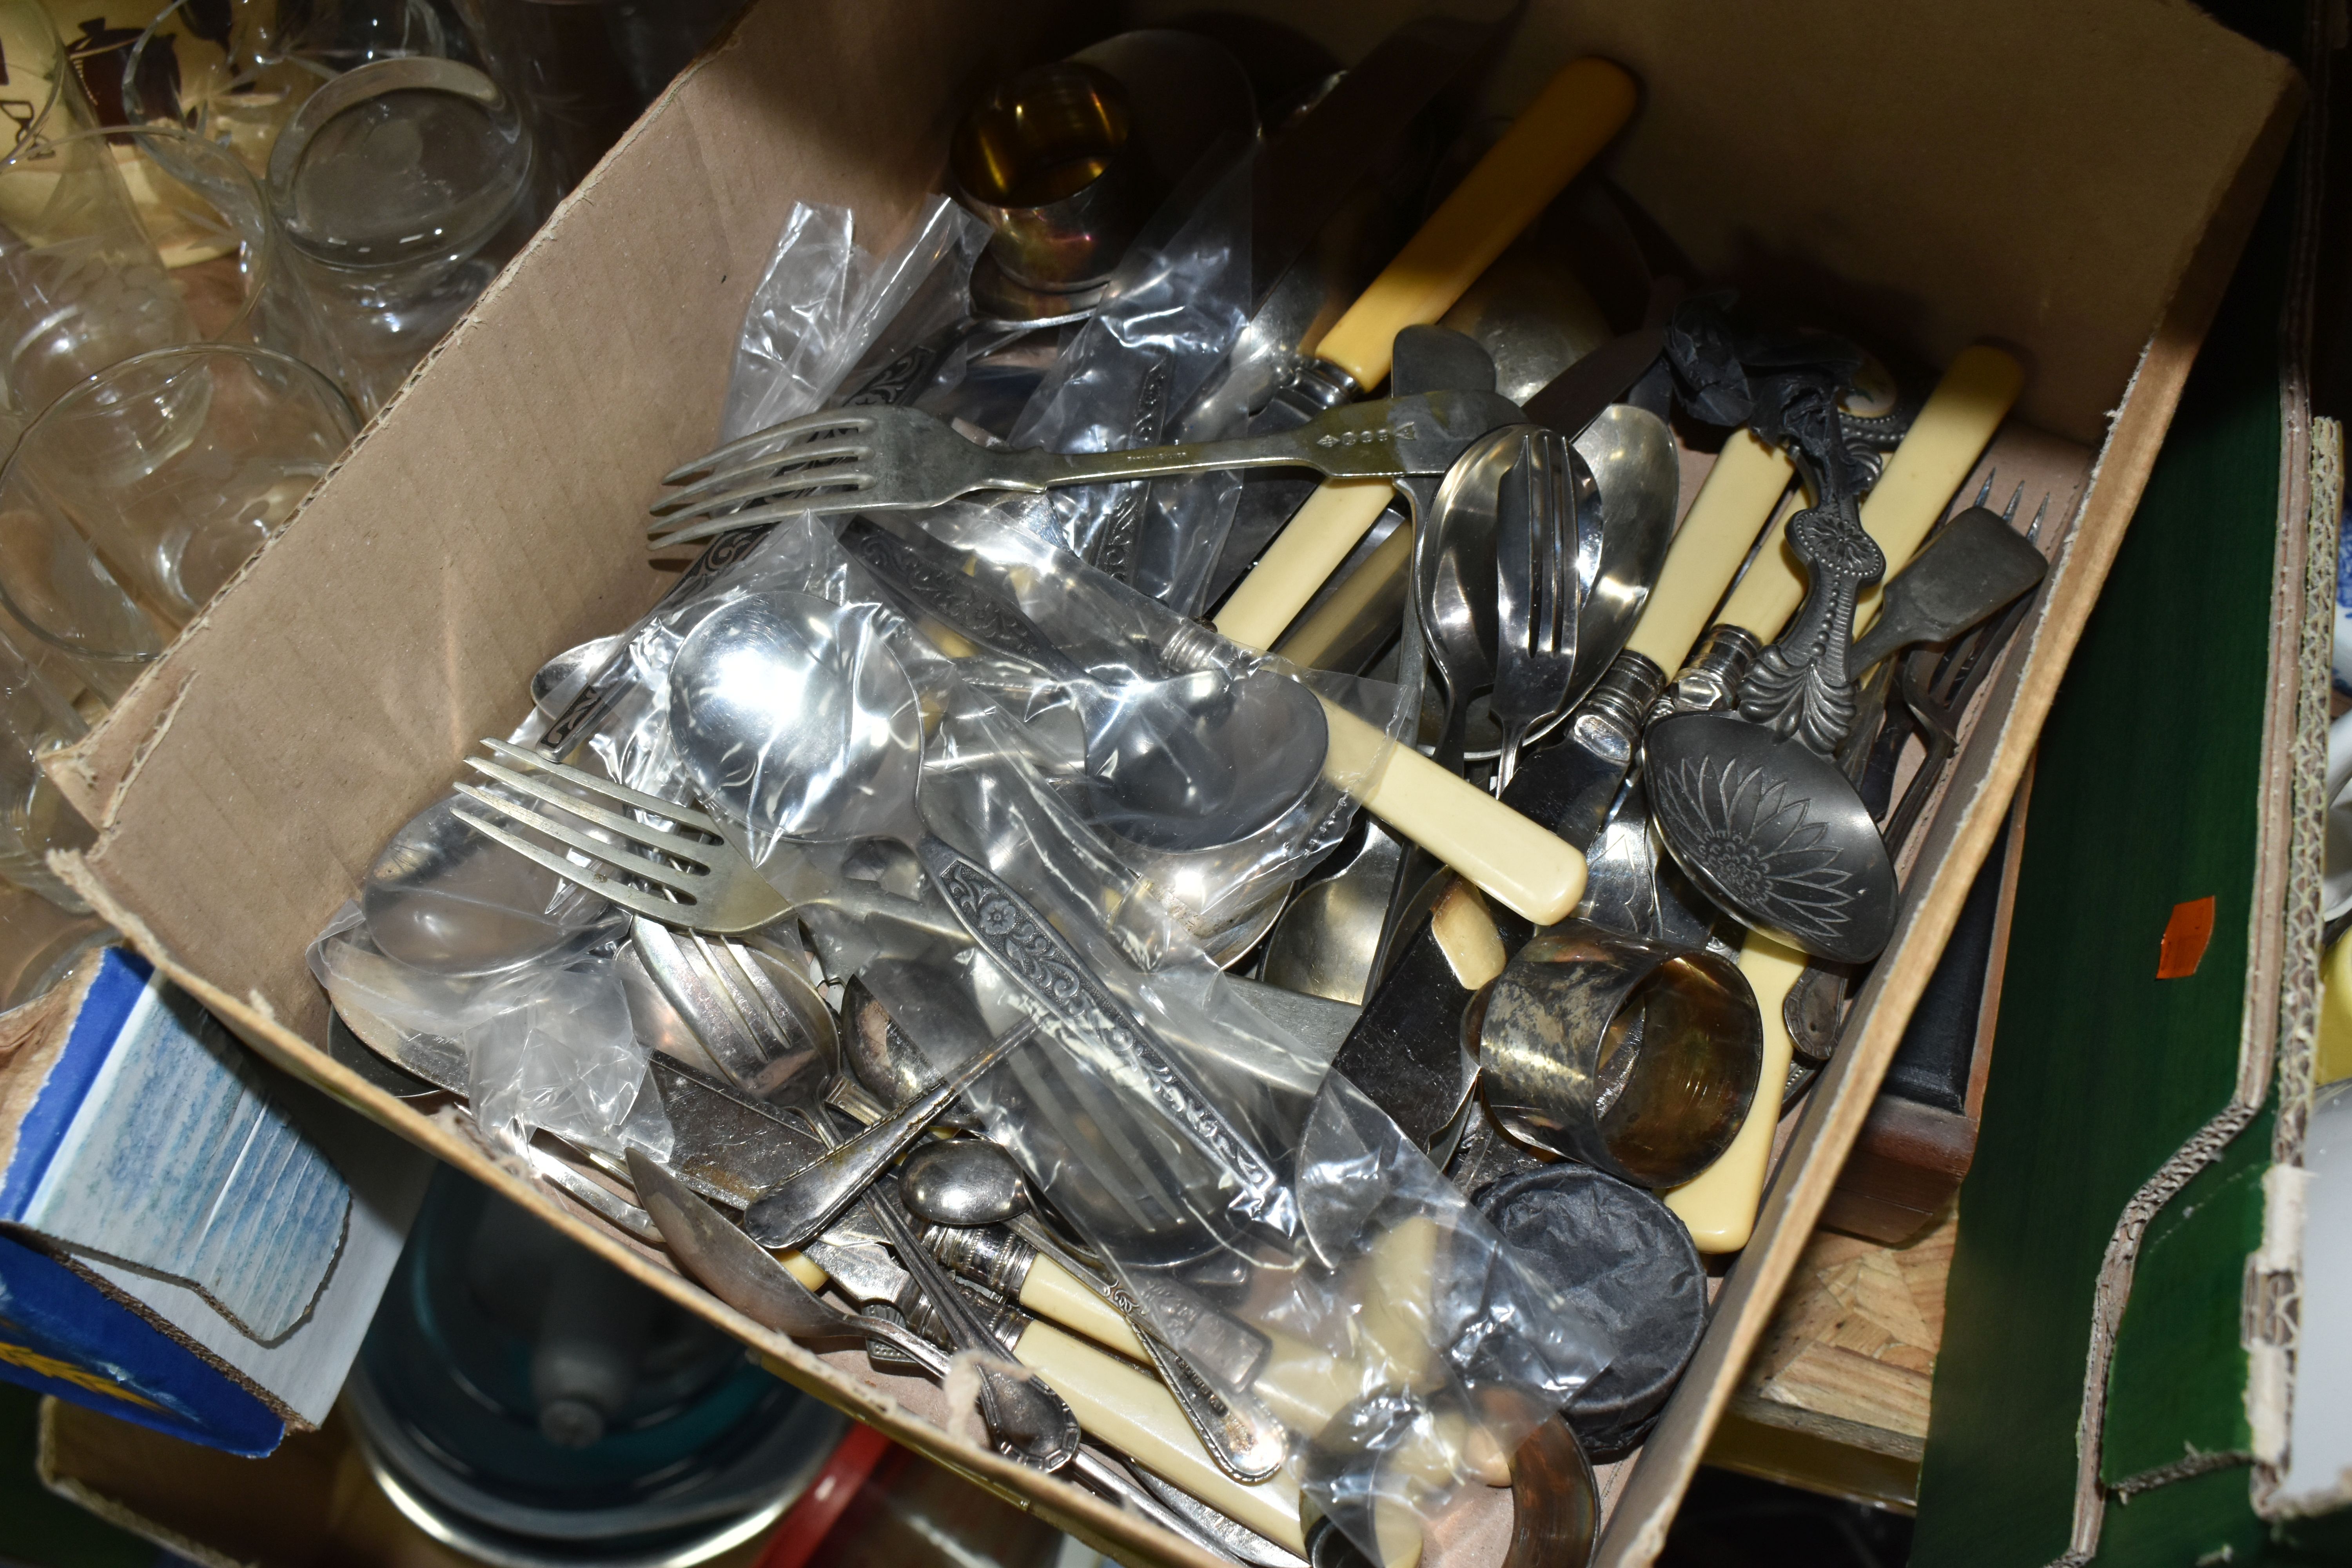 FIVE BOXES AND LOOSE CERAMICS, GLASS, CUTLERY AND KITCHEN WARE, to include a Moulinex food processor - Image 3 of 7